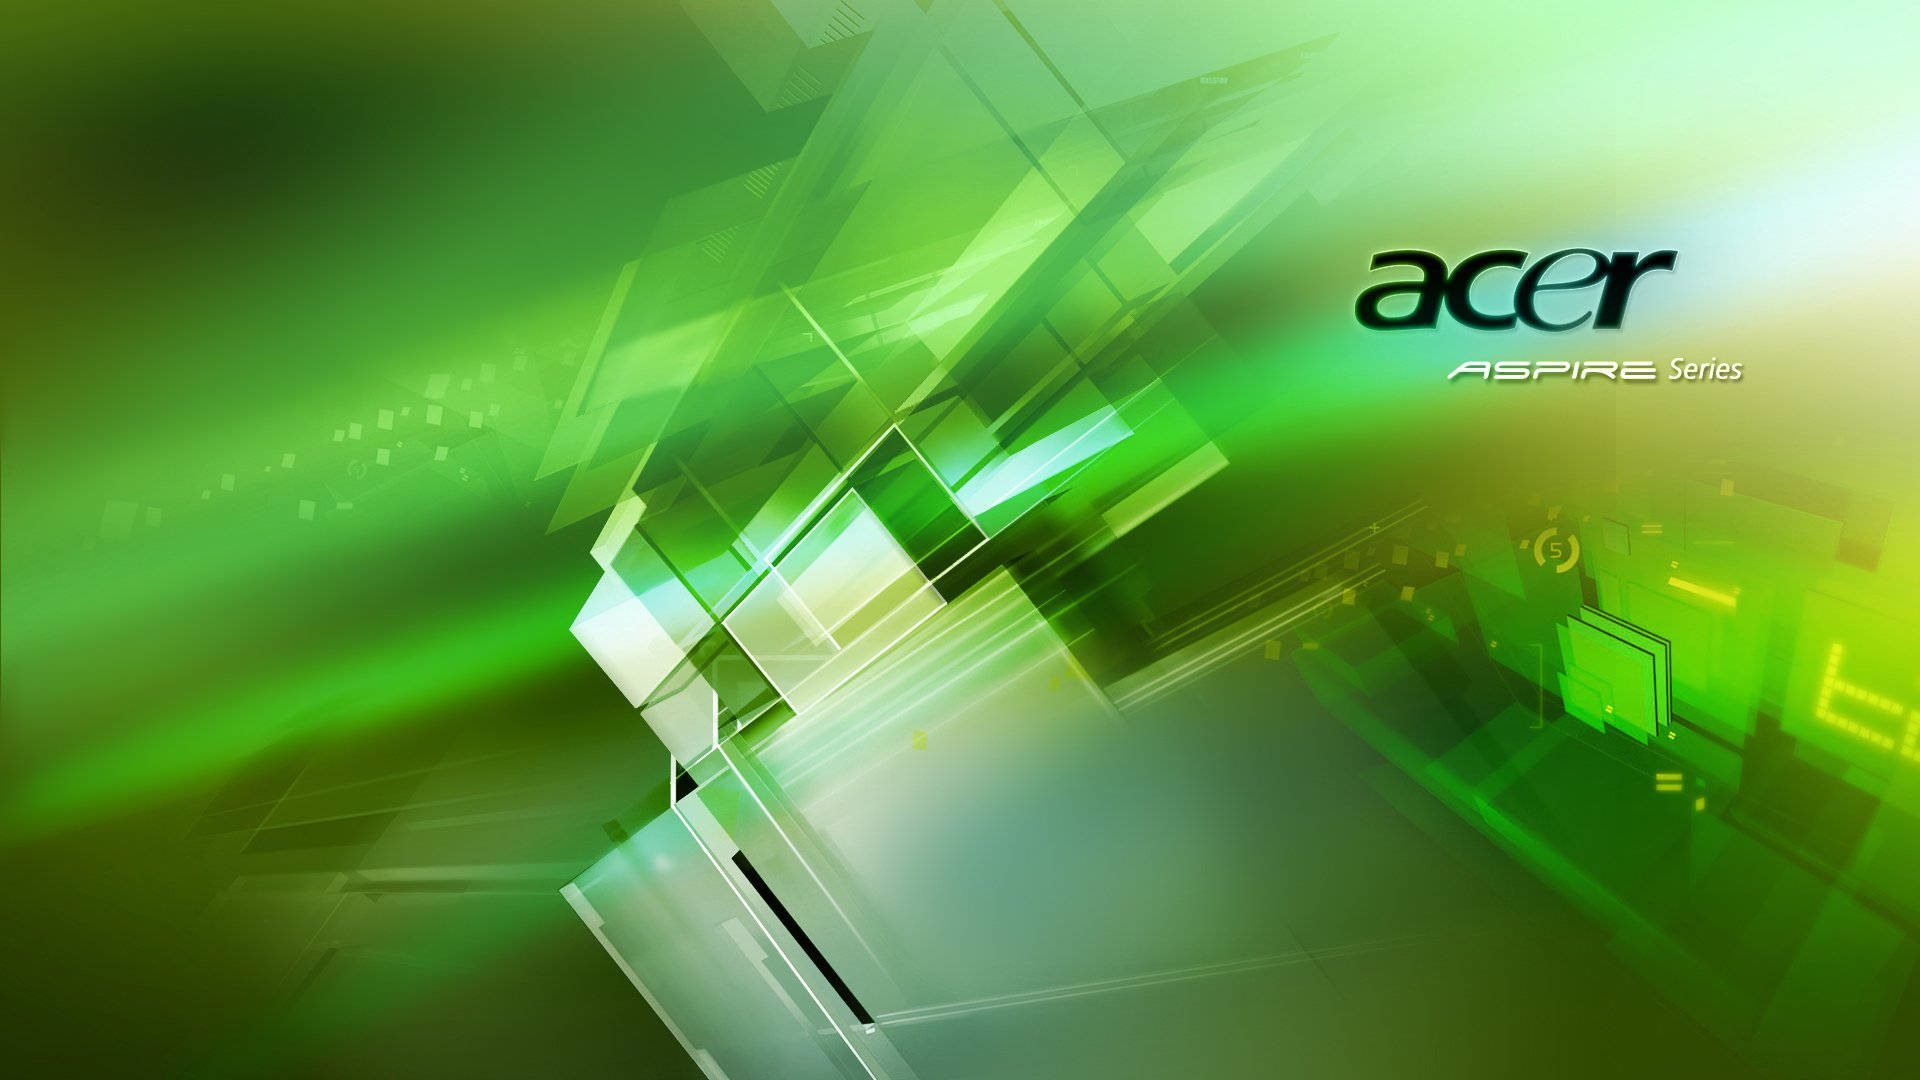 Green Acer Aspire Series Geometric Picture